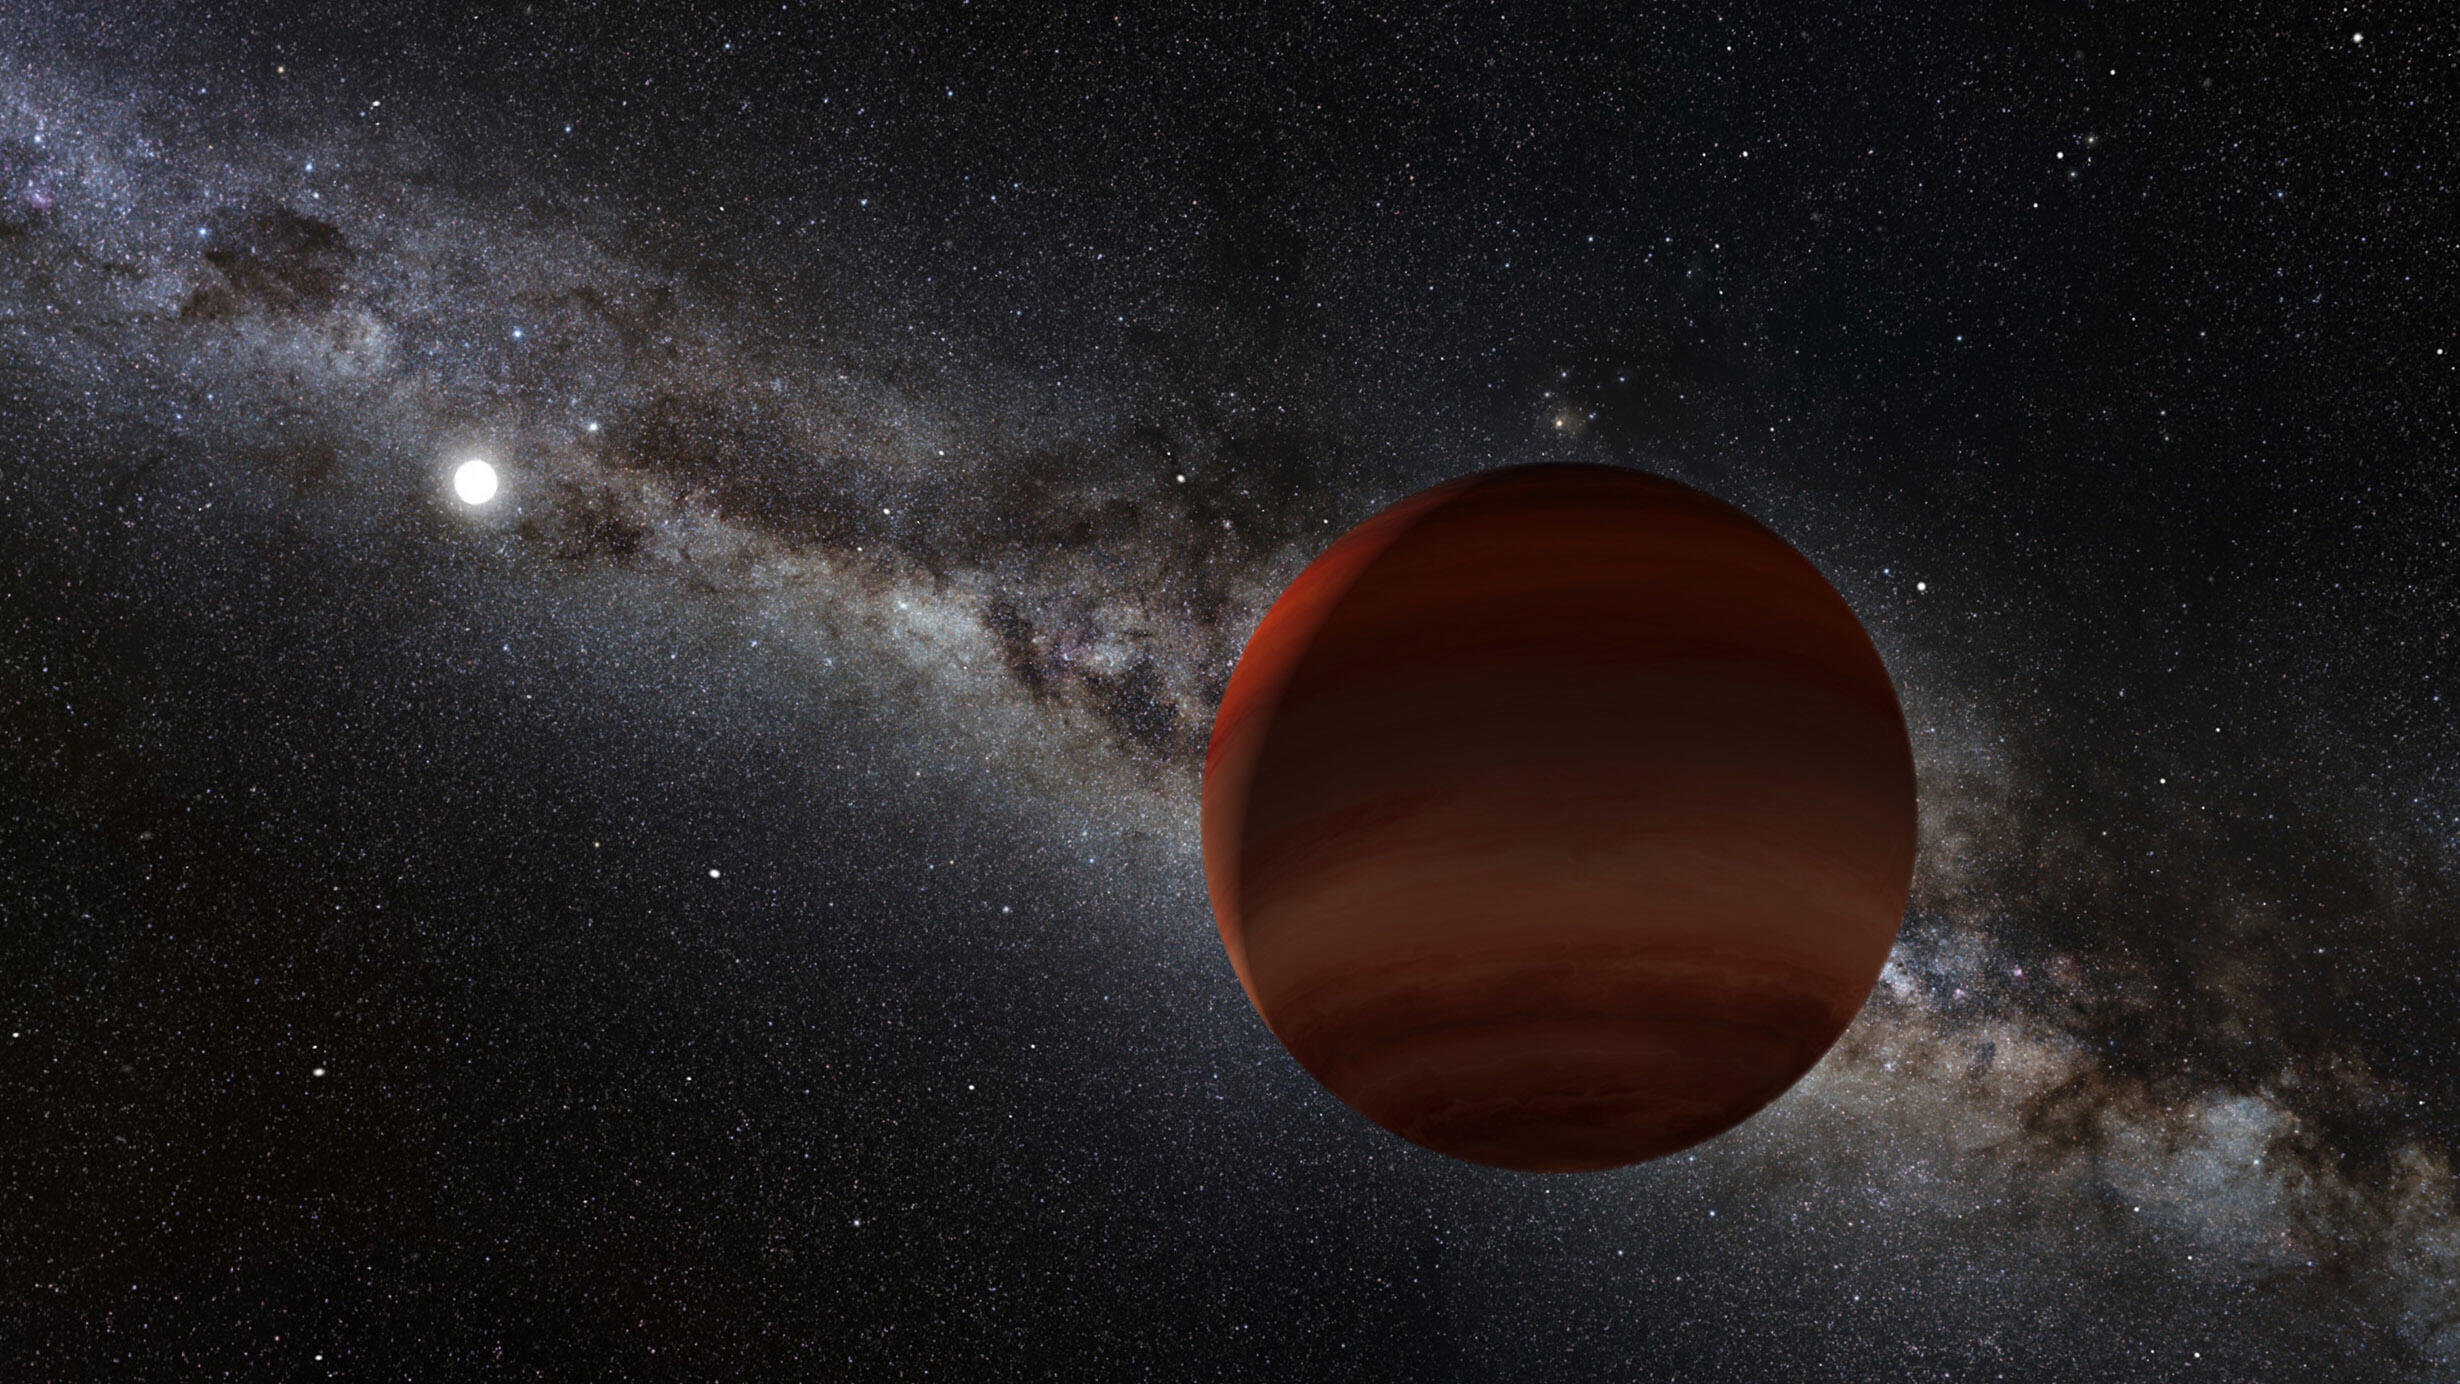 Rendering depicts the brown dwarf in the foreground, with the white dwarf appearing as a small spot of light in the distance.Credit: NOIRLab/NSF/AURA/